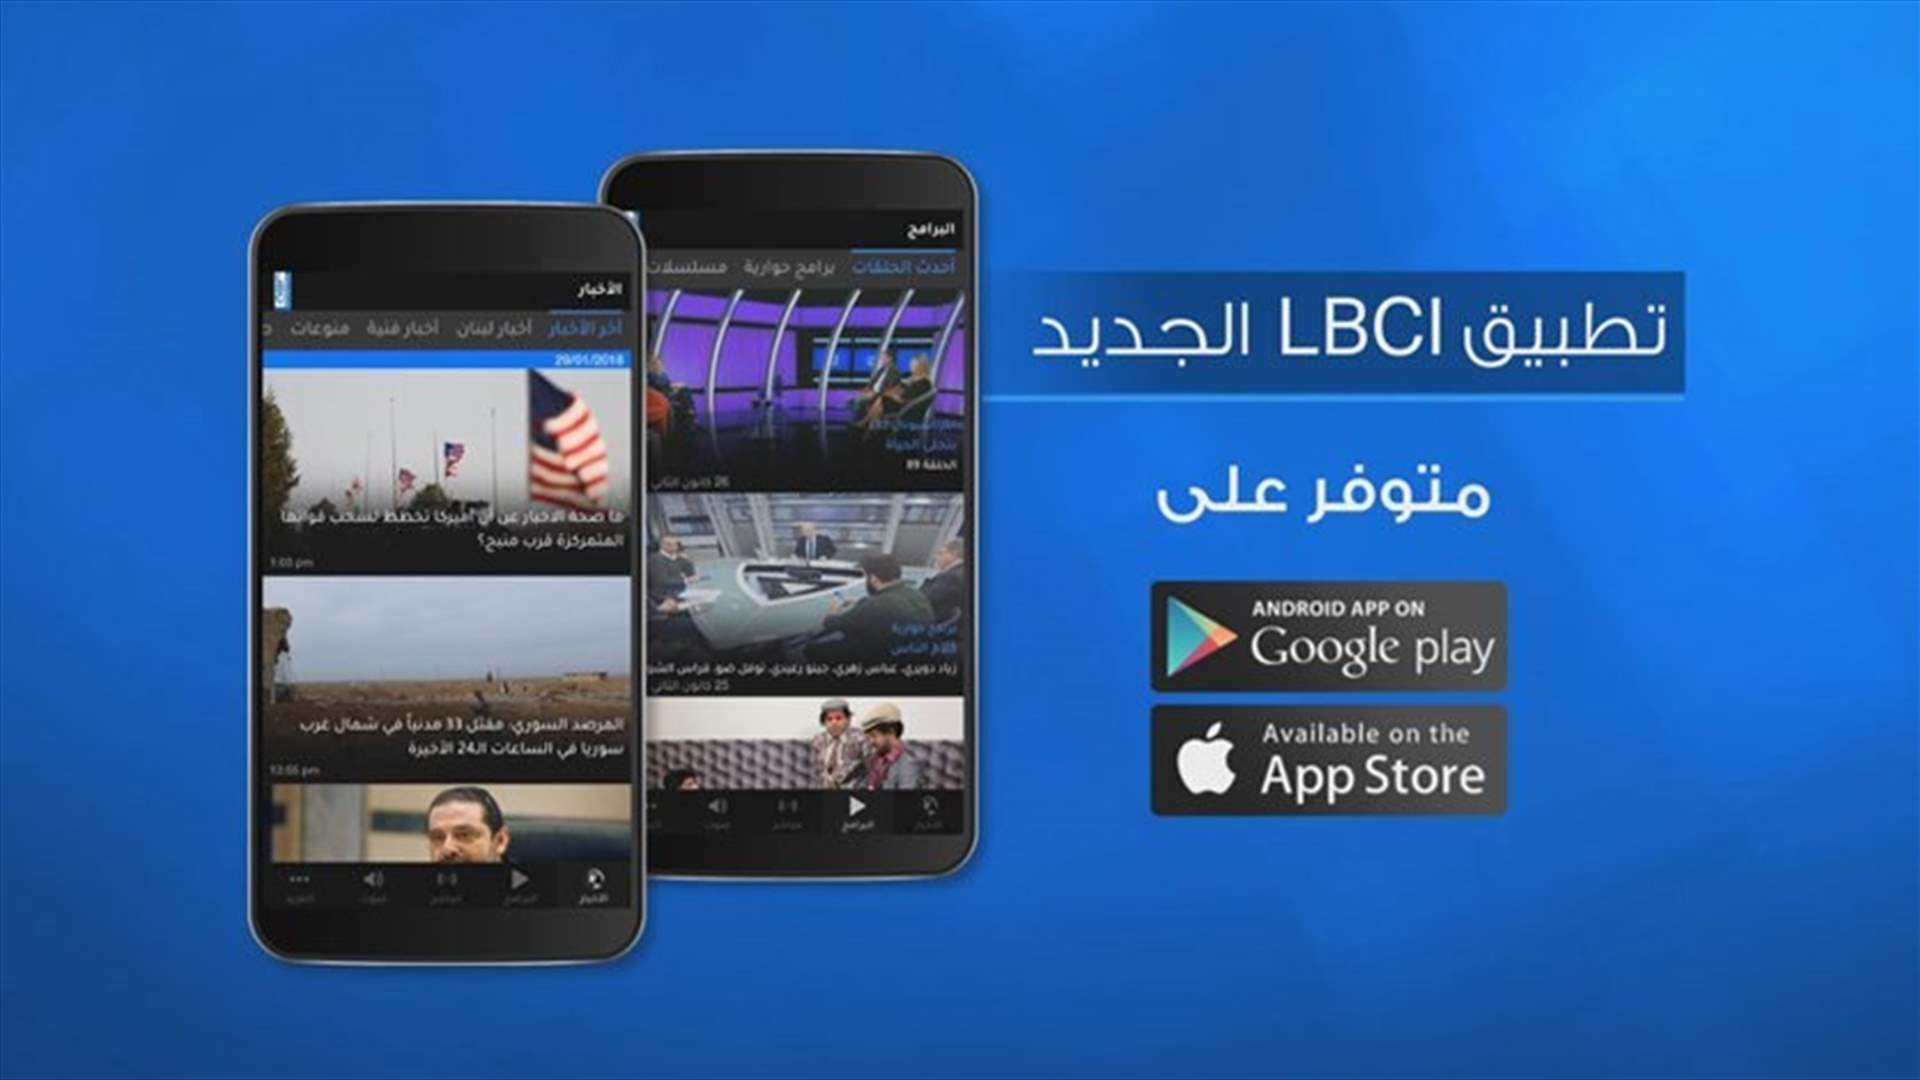 To LBCI News subscribers: Please update your application